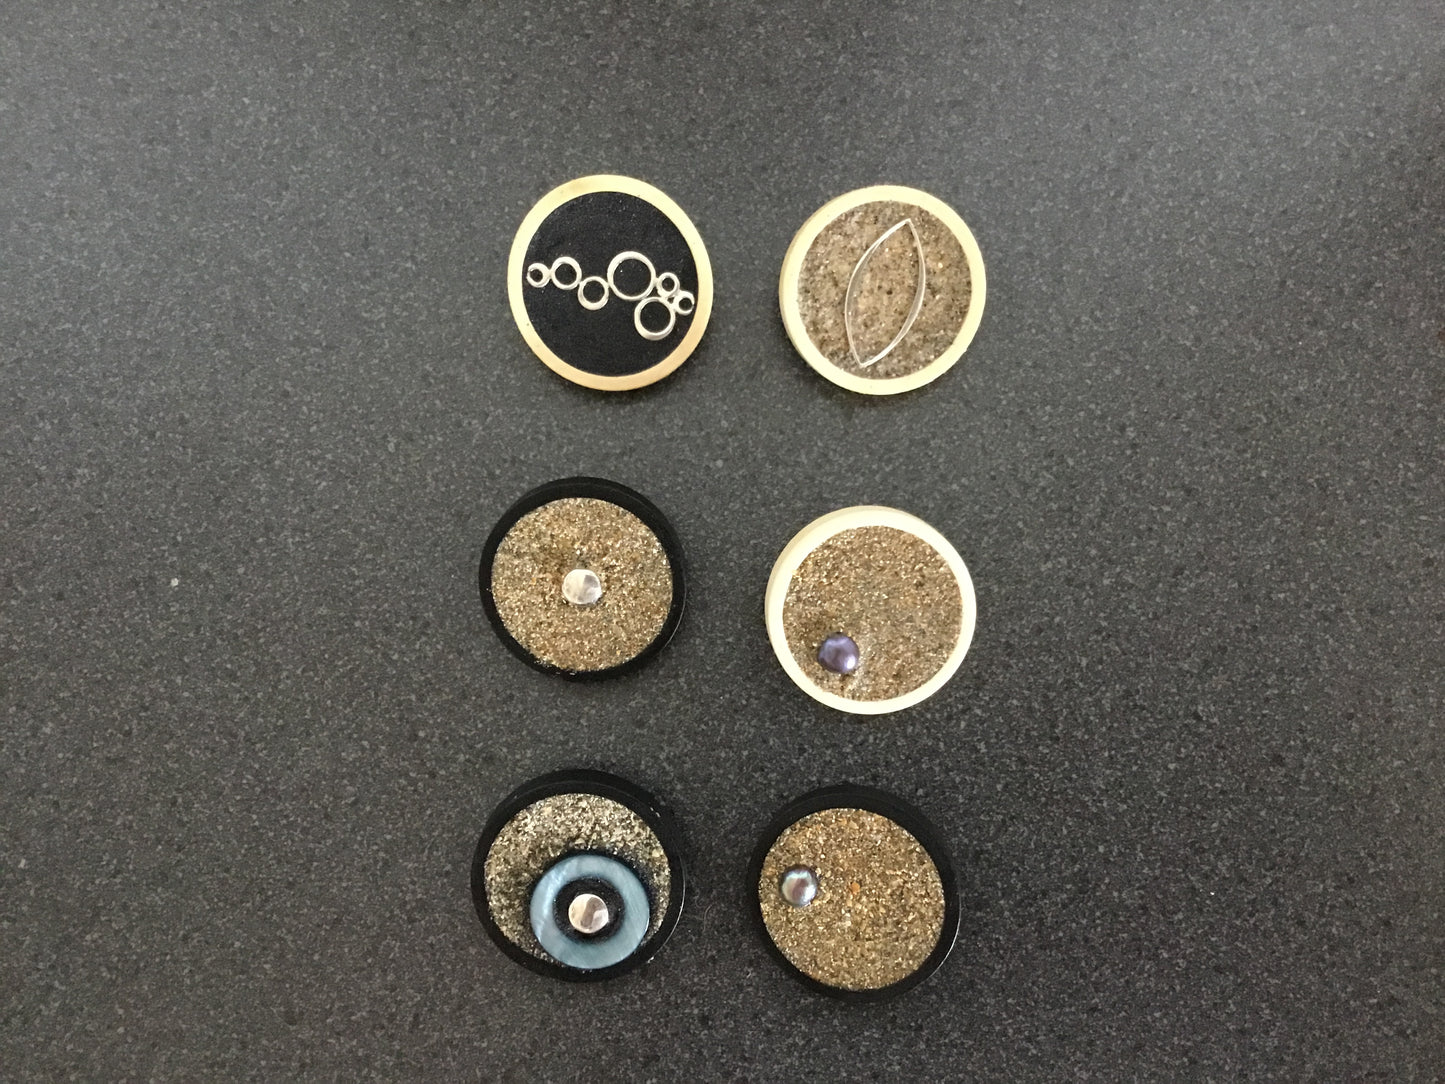 Sand brooches